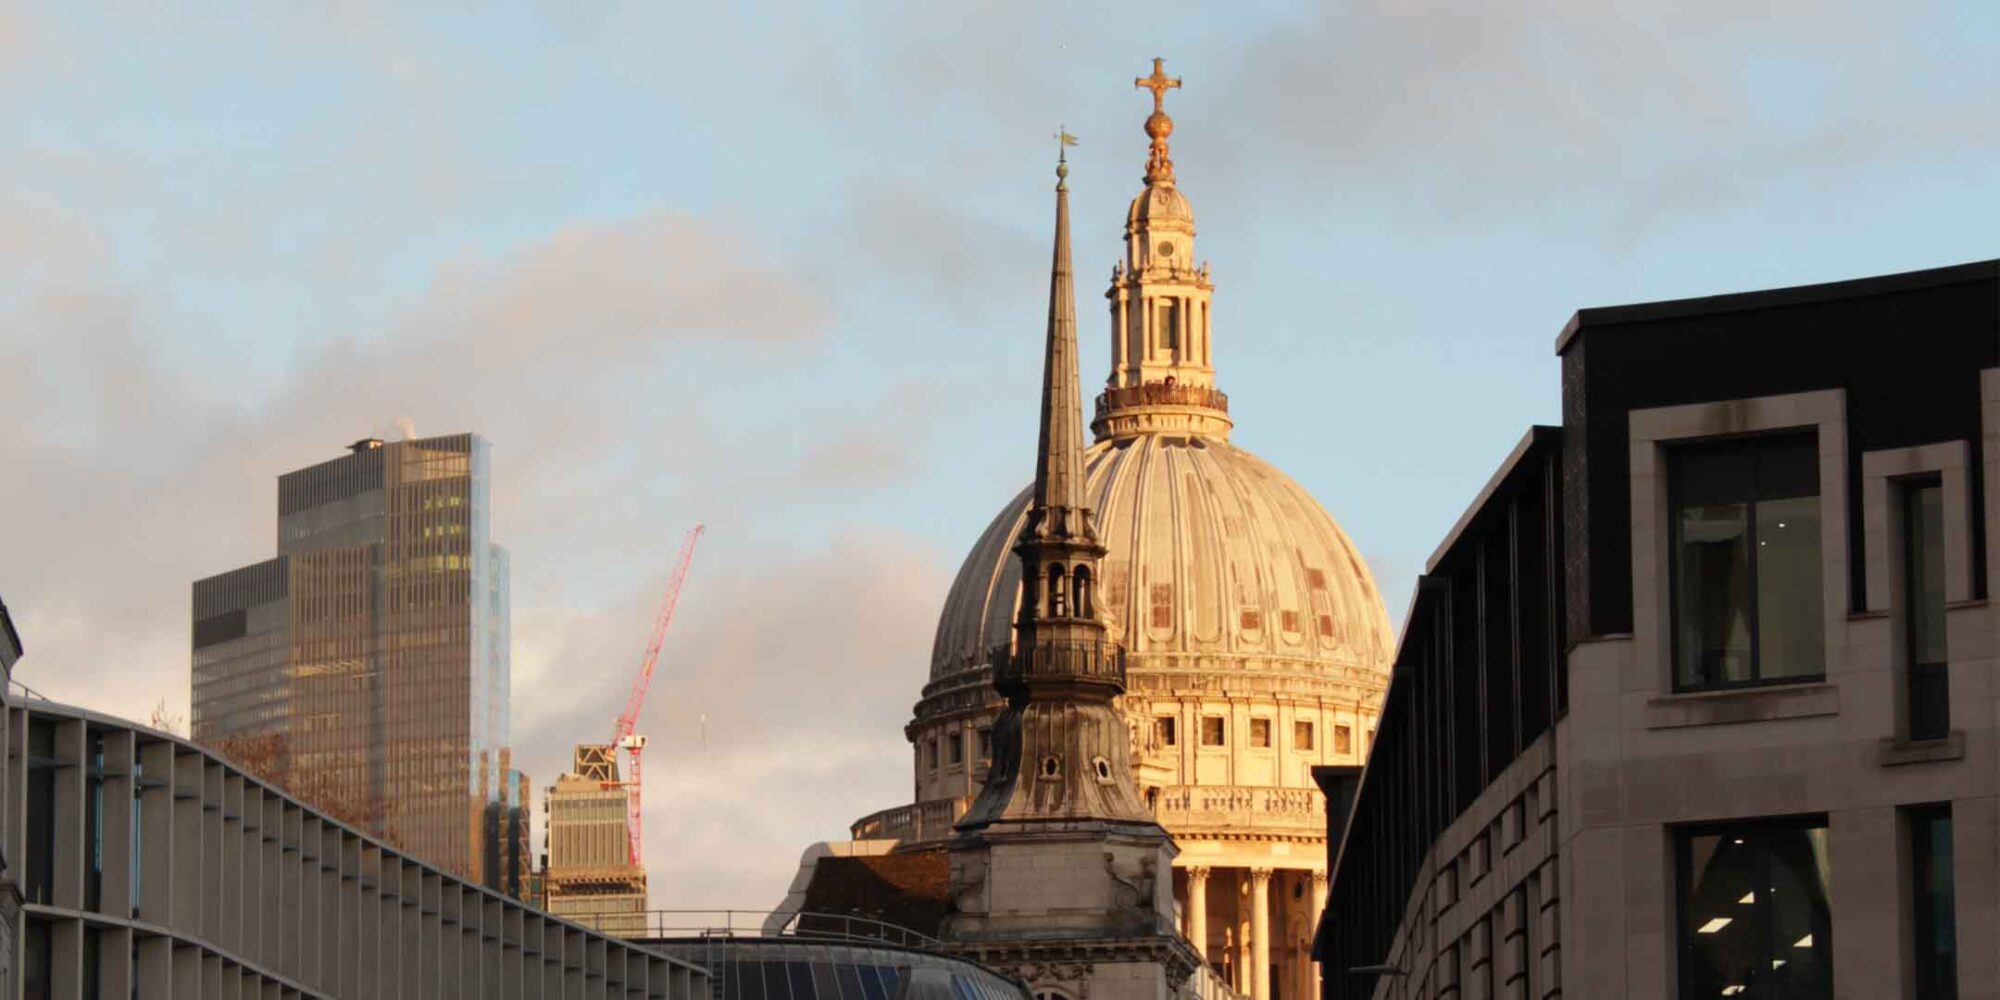 sir-christopher-wren-spires-domes-city-of-london